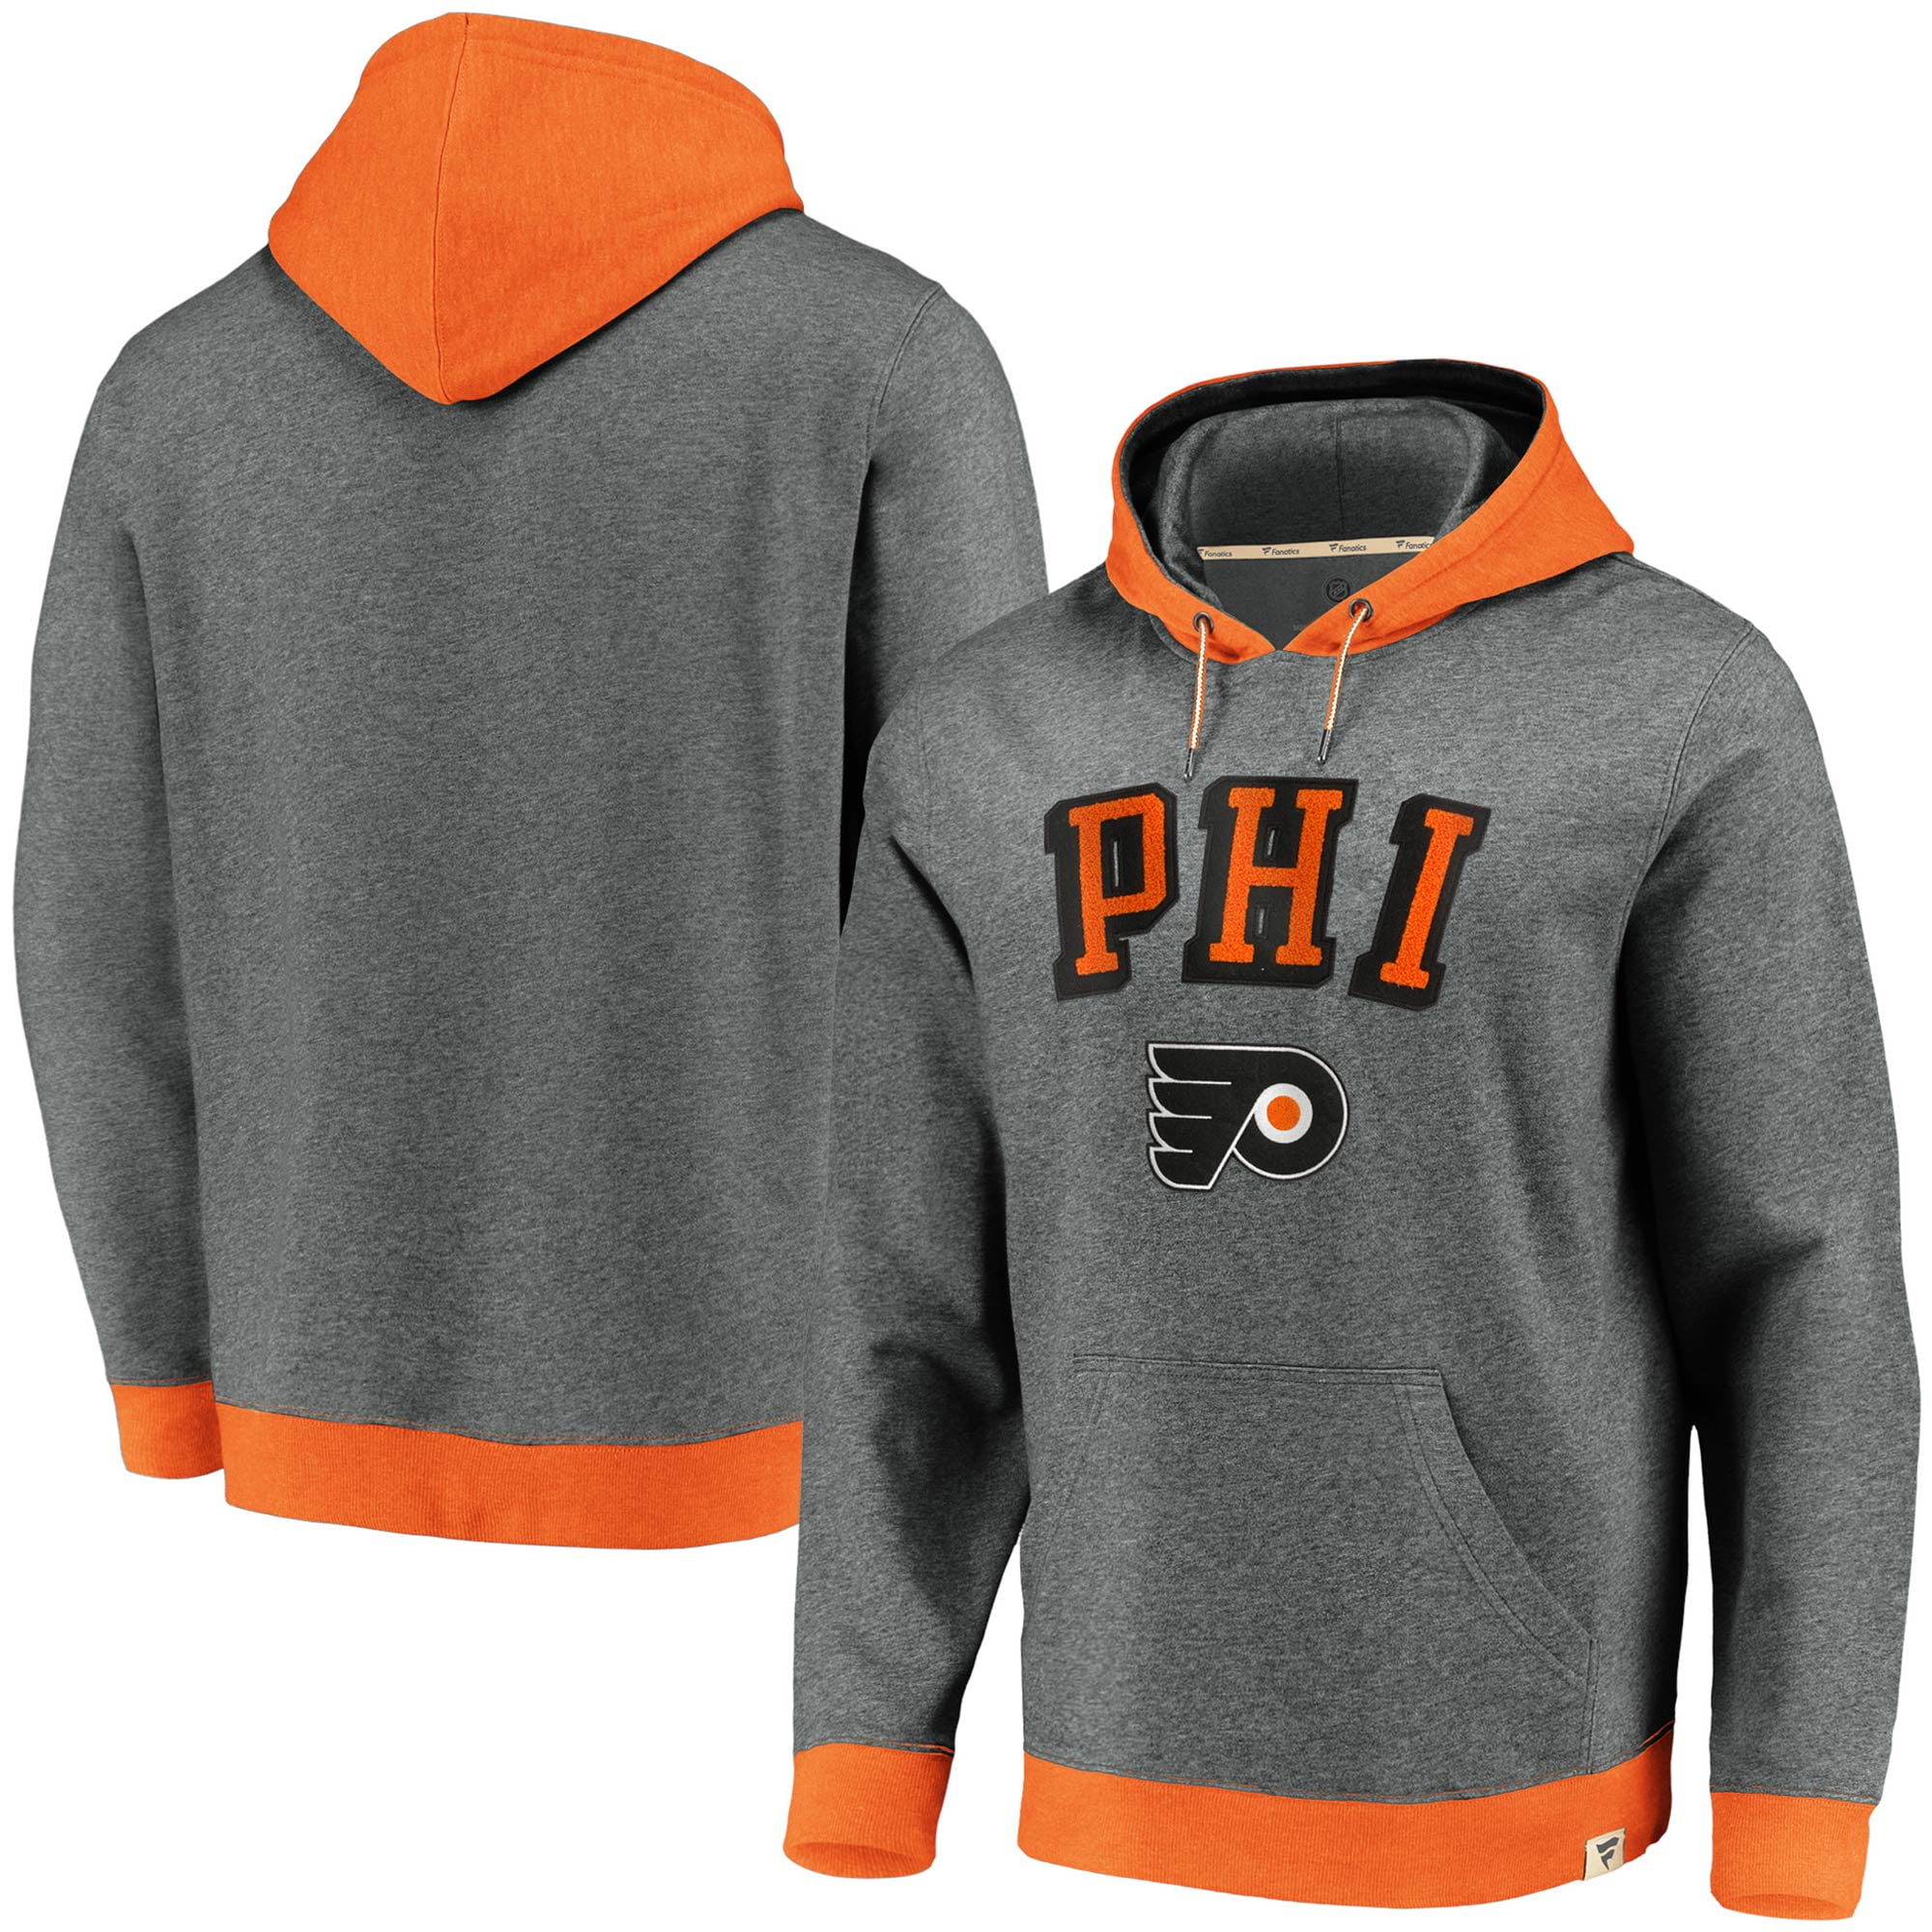 gray flyers jersey